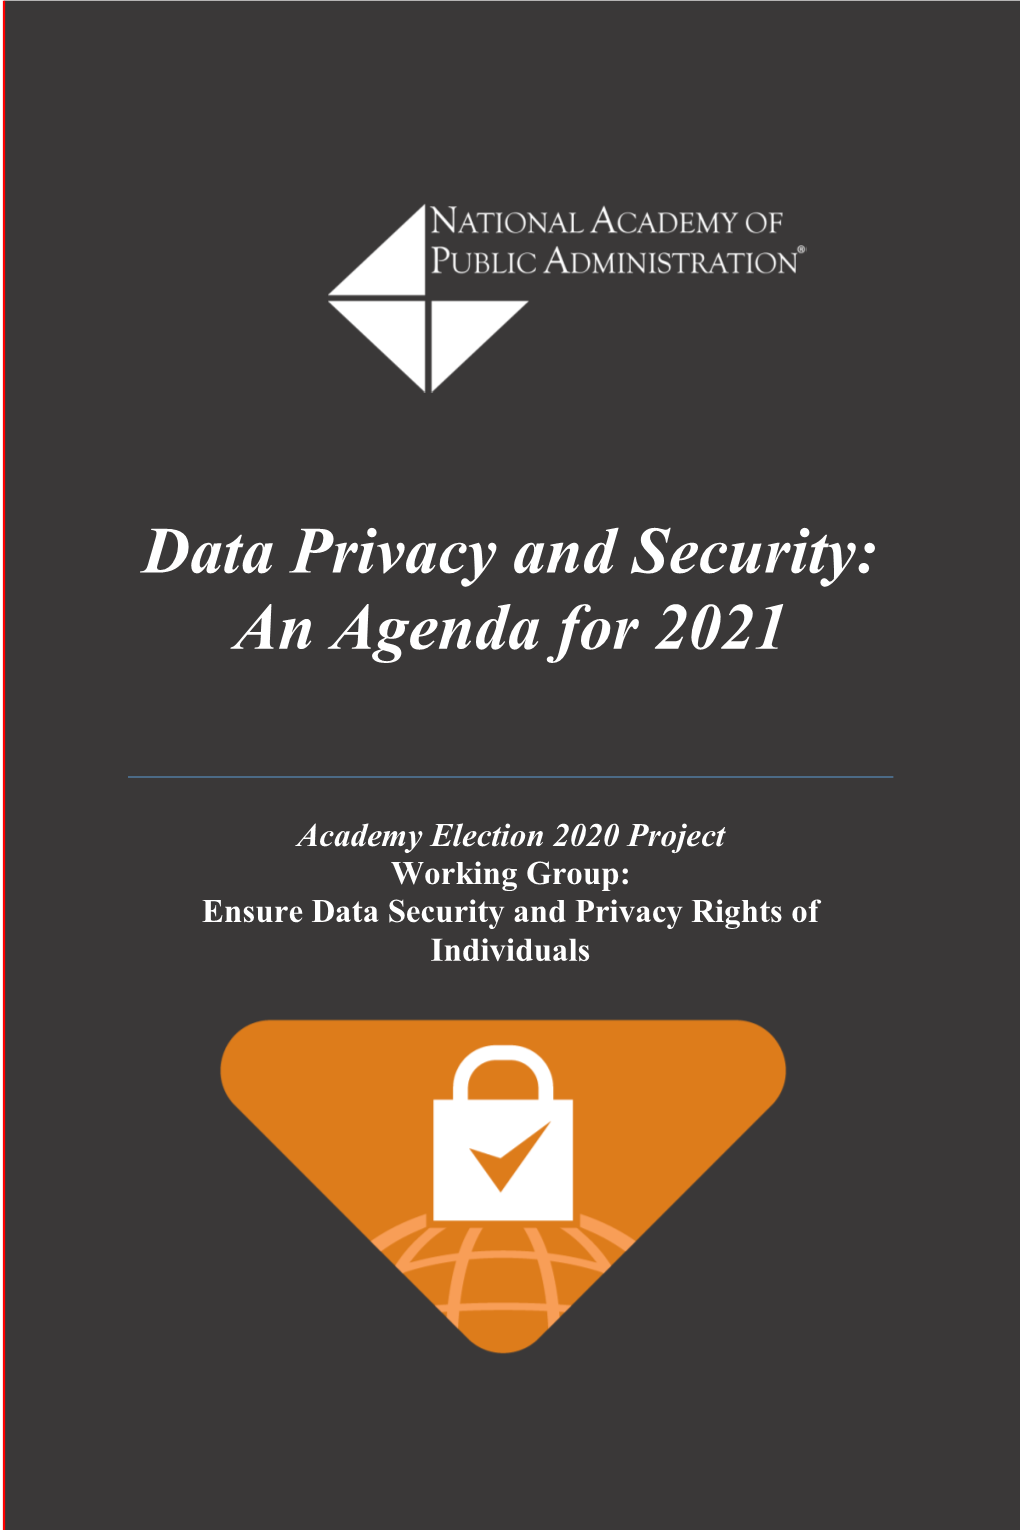 Data Privacy and Security: an Agenda for 2021